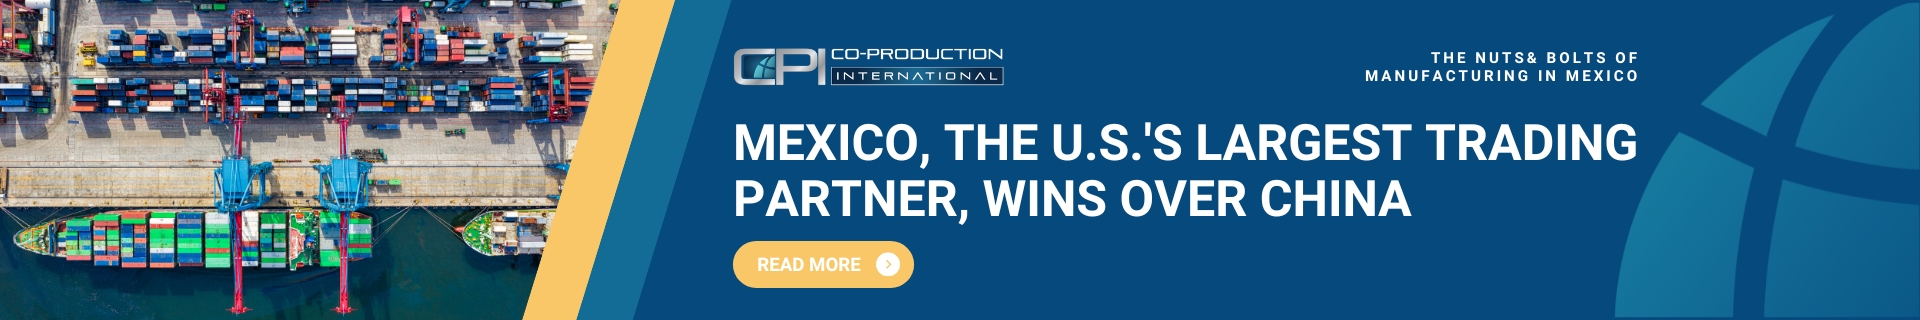 Mexico The USs Largest Trading Partner